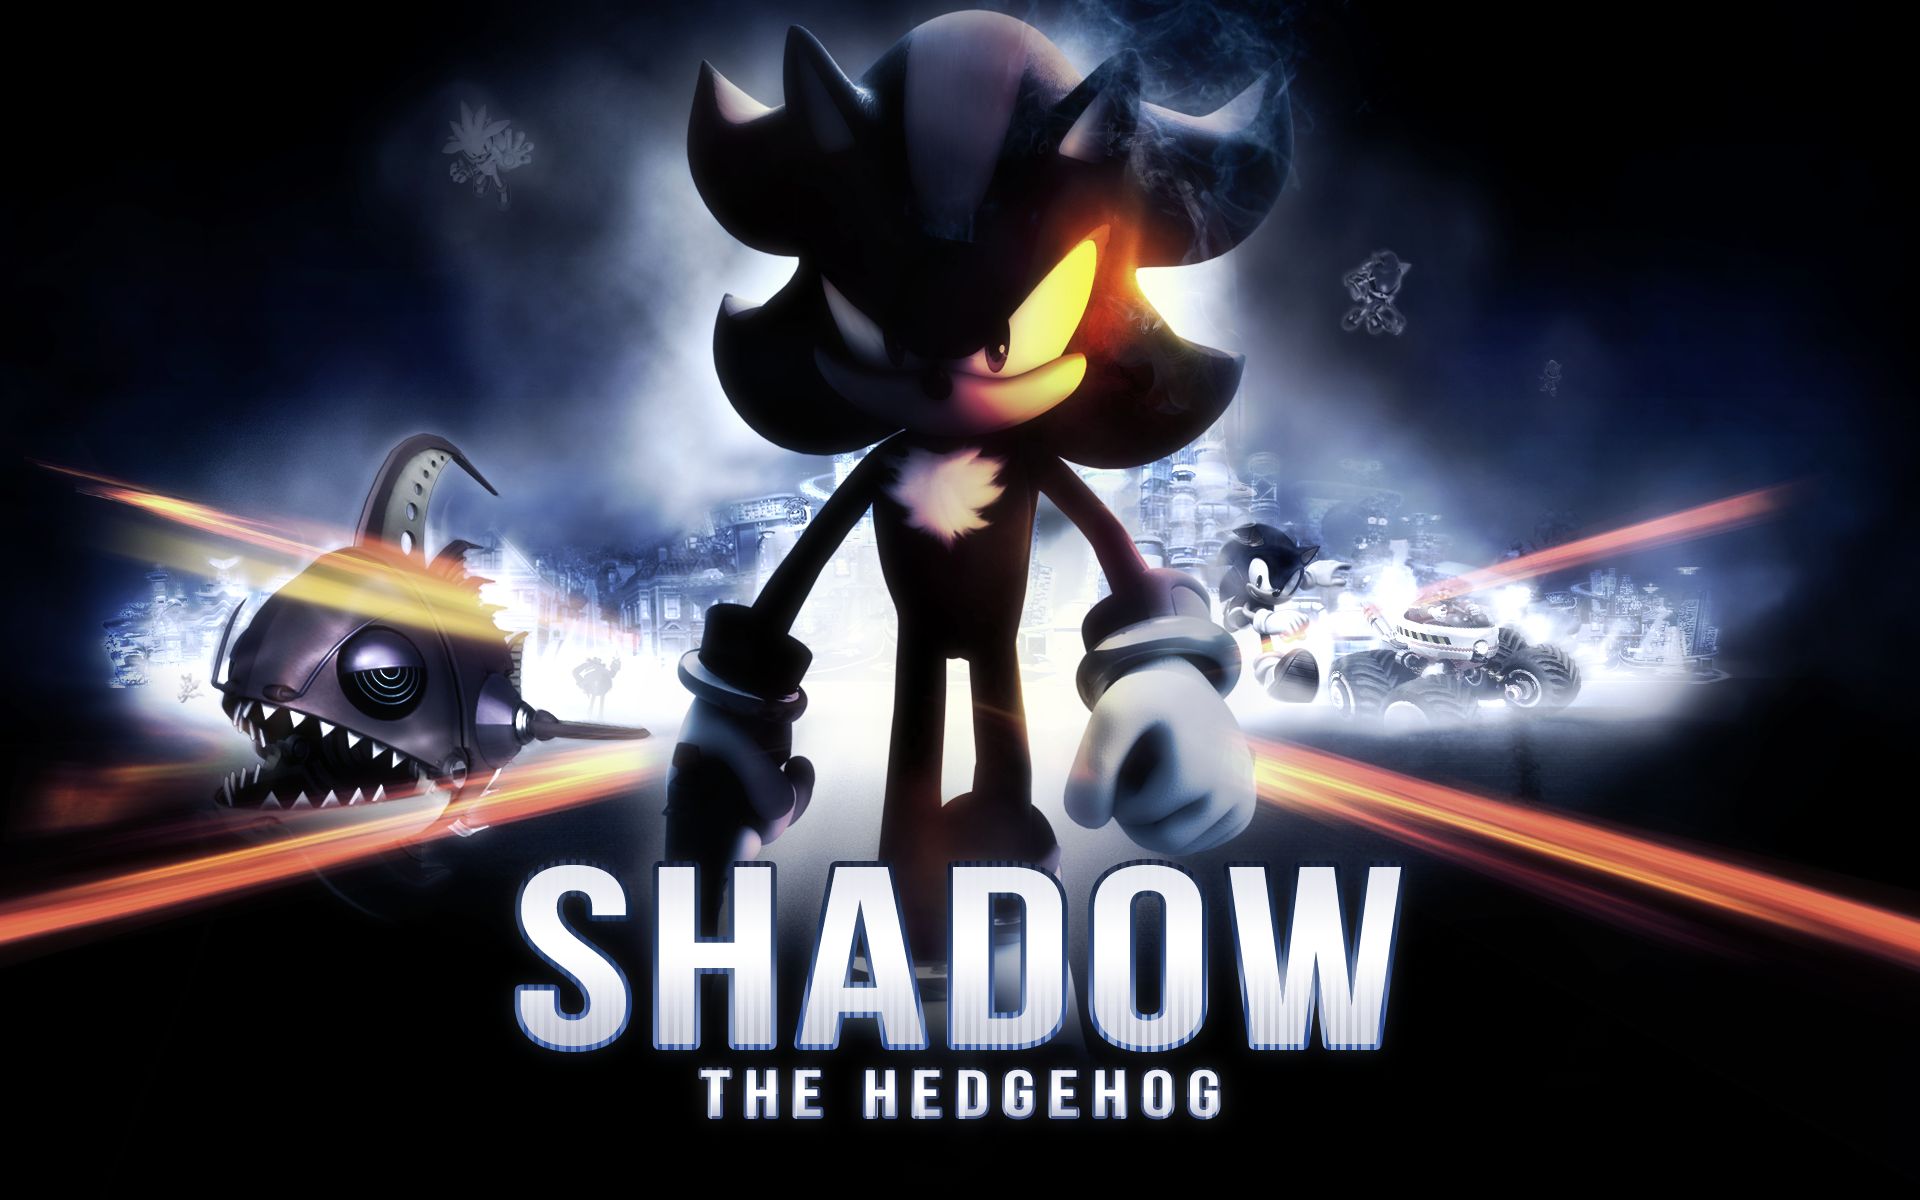 sonic, shadow the hedgehog, video game